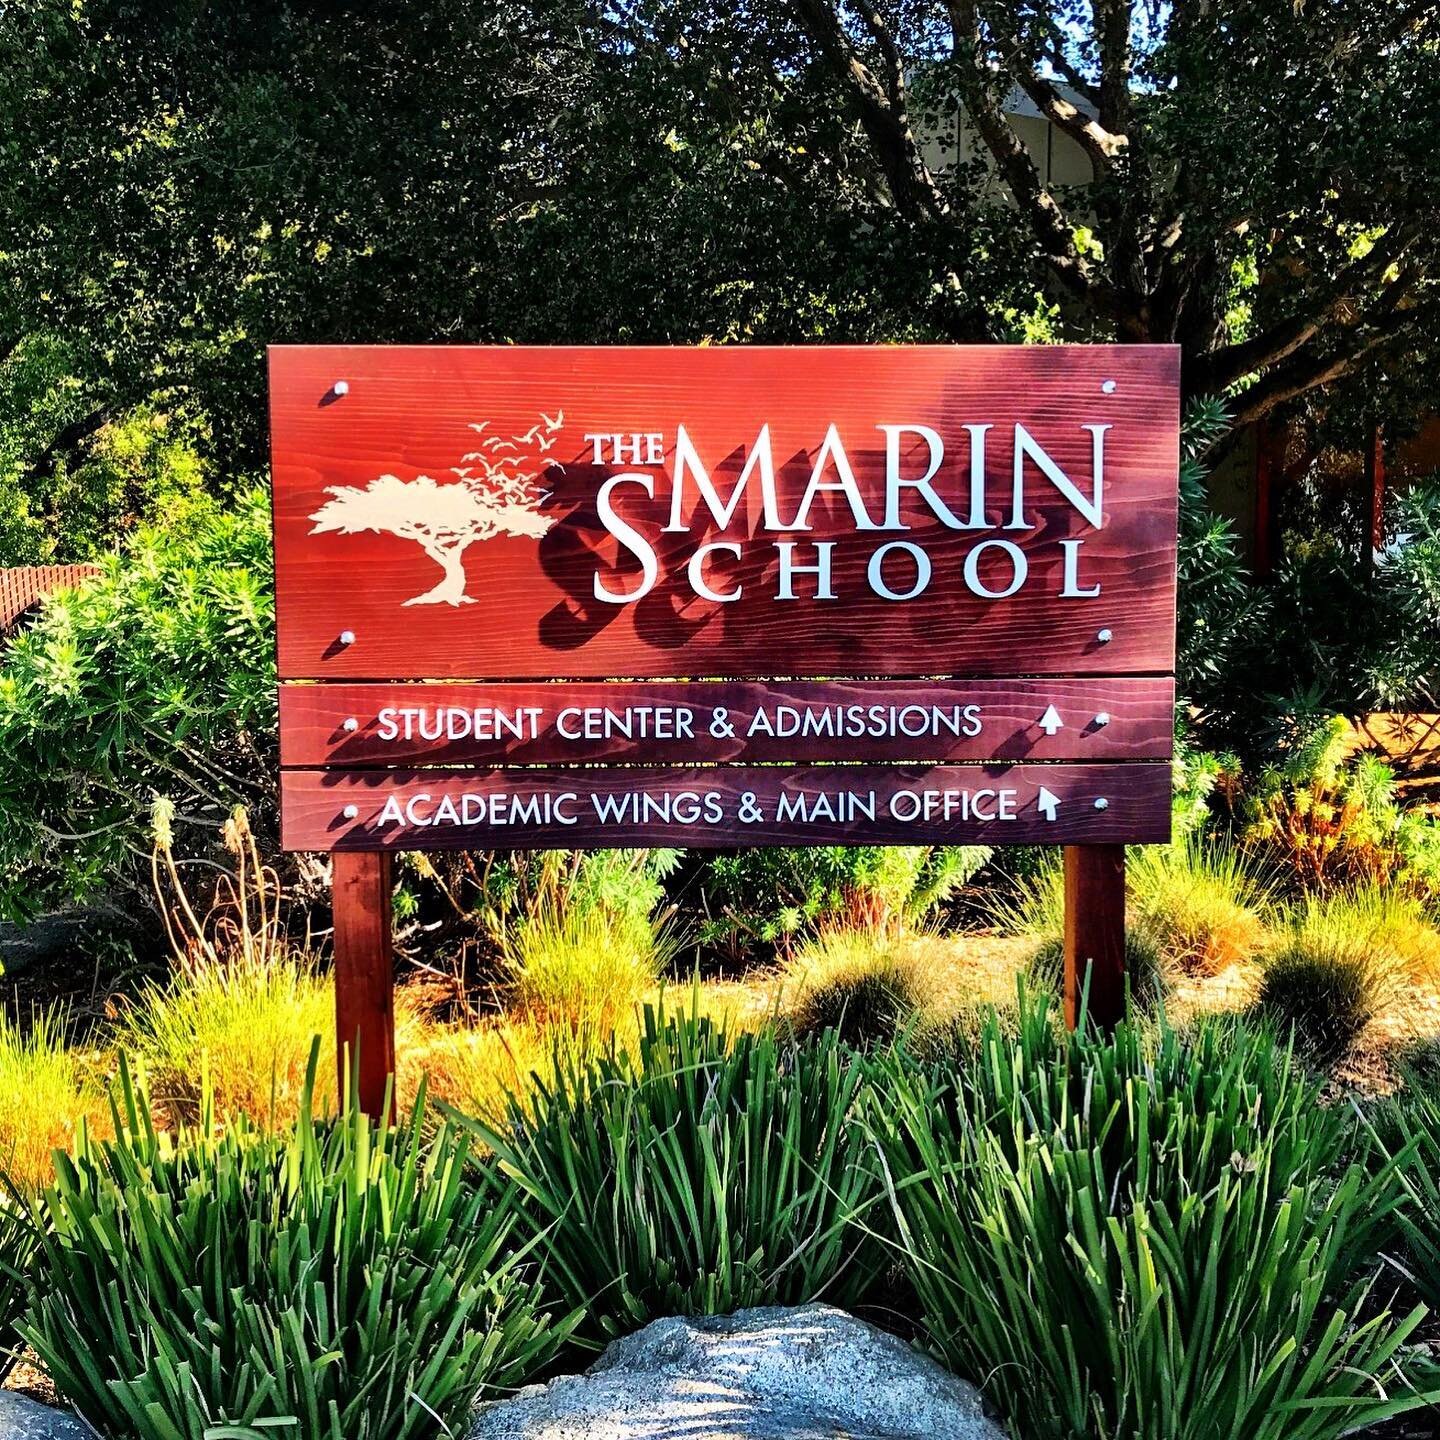 Redwood Entry Sign with Metal Letters for @themarinschool + Amazing Landscaping to surround ! #monumentsign #woodsign #metalletters #redwood #aluminum #landscaping #sunsout #marin #signmaker #stained #shadows #grassisgreener #sanrafael #sanpedro #sch